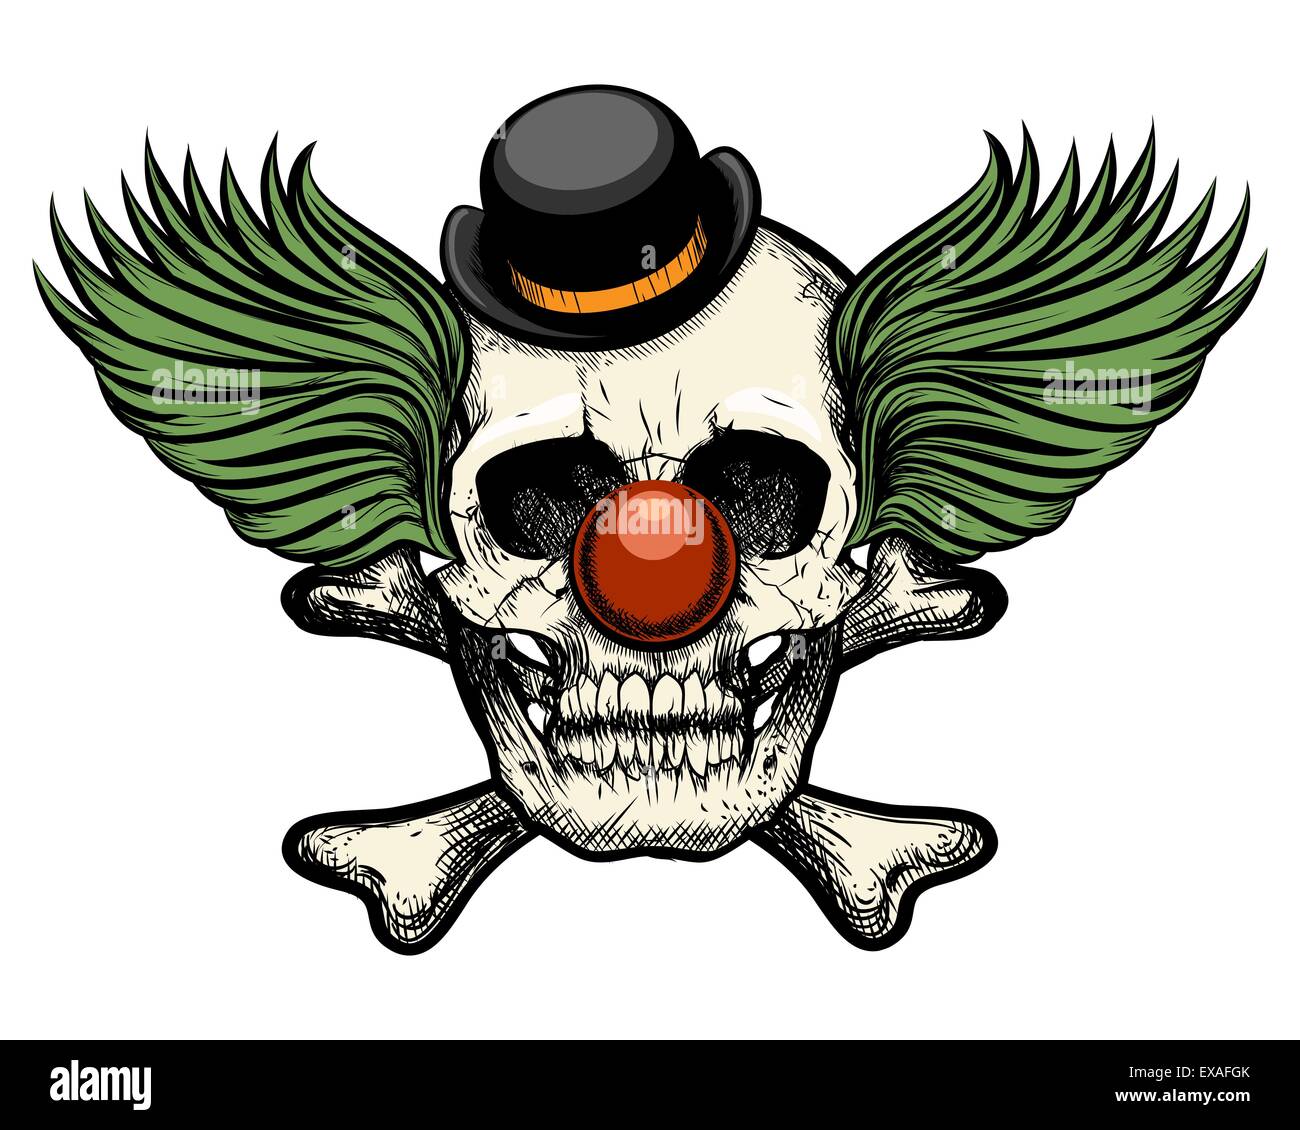 Clown skull in circus hat. Isolated on white background. Retro style. Stock Vector